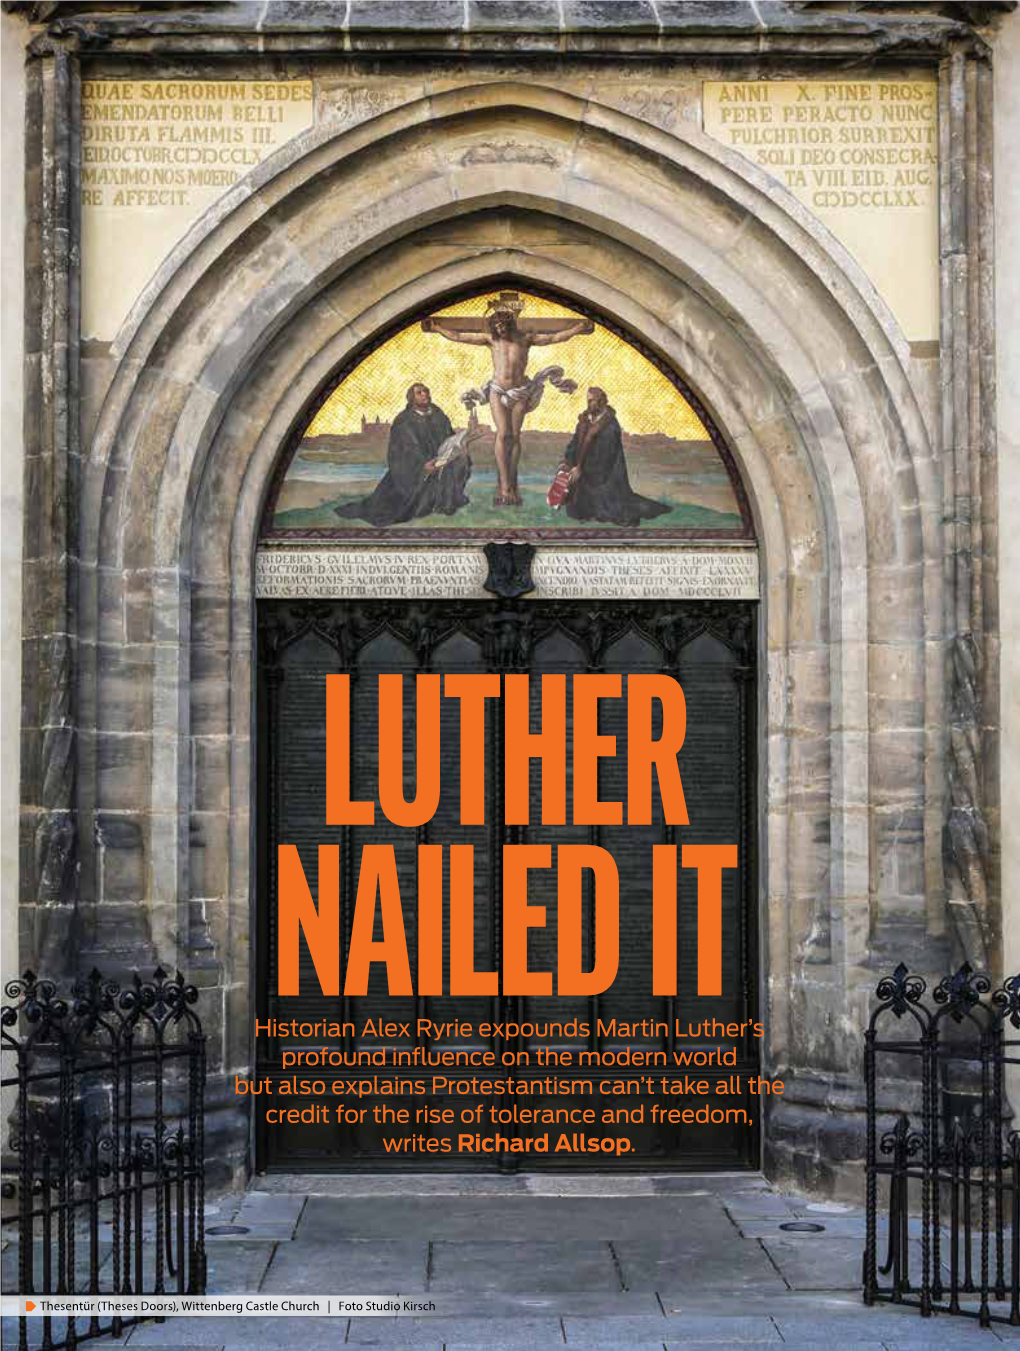 Historian Alex Ryrie Expounds Martin Luther's Profound Influence on The